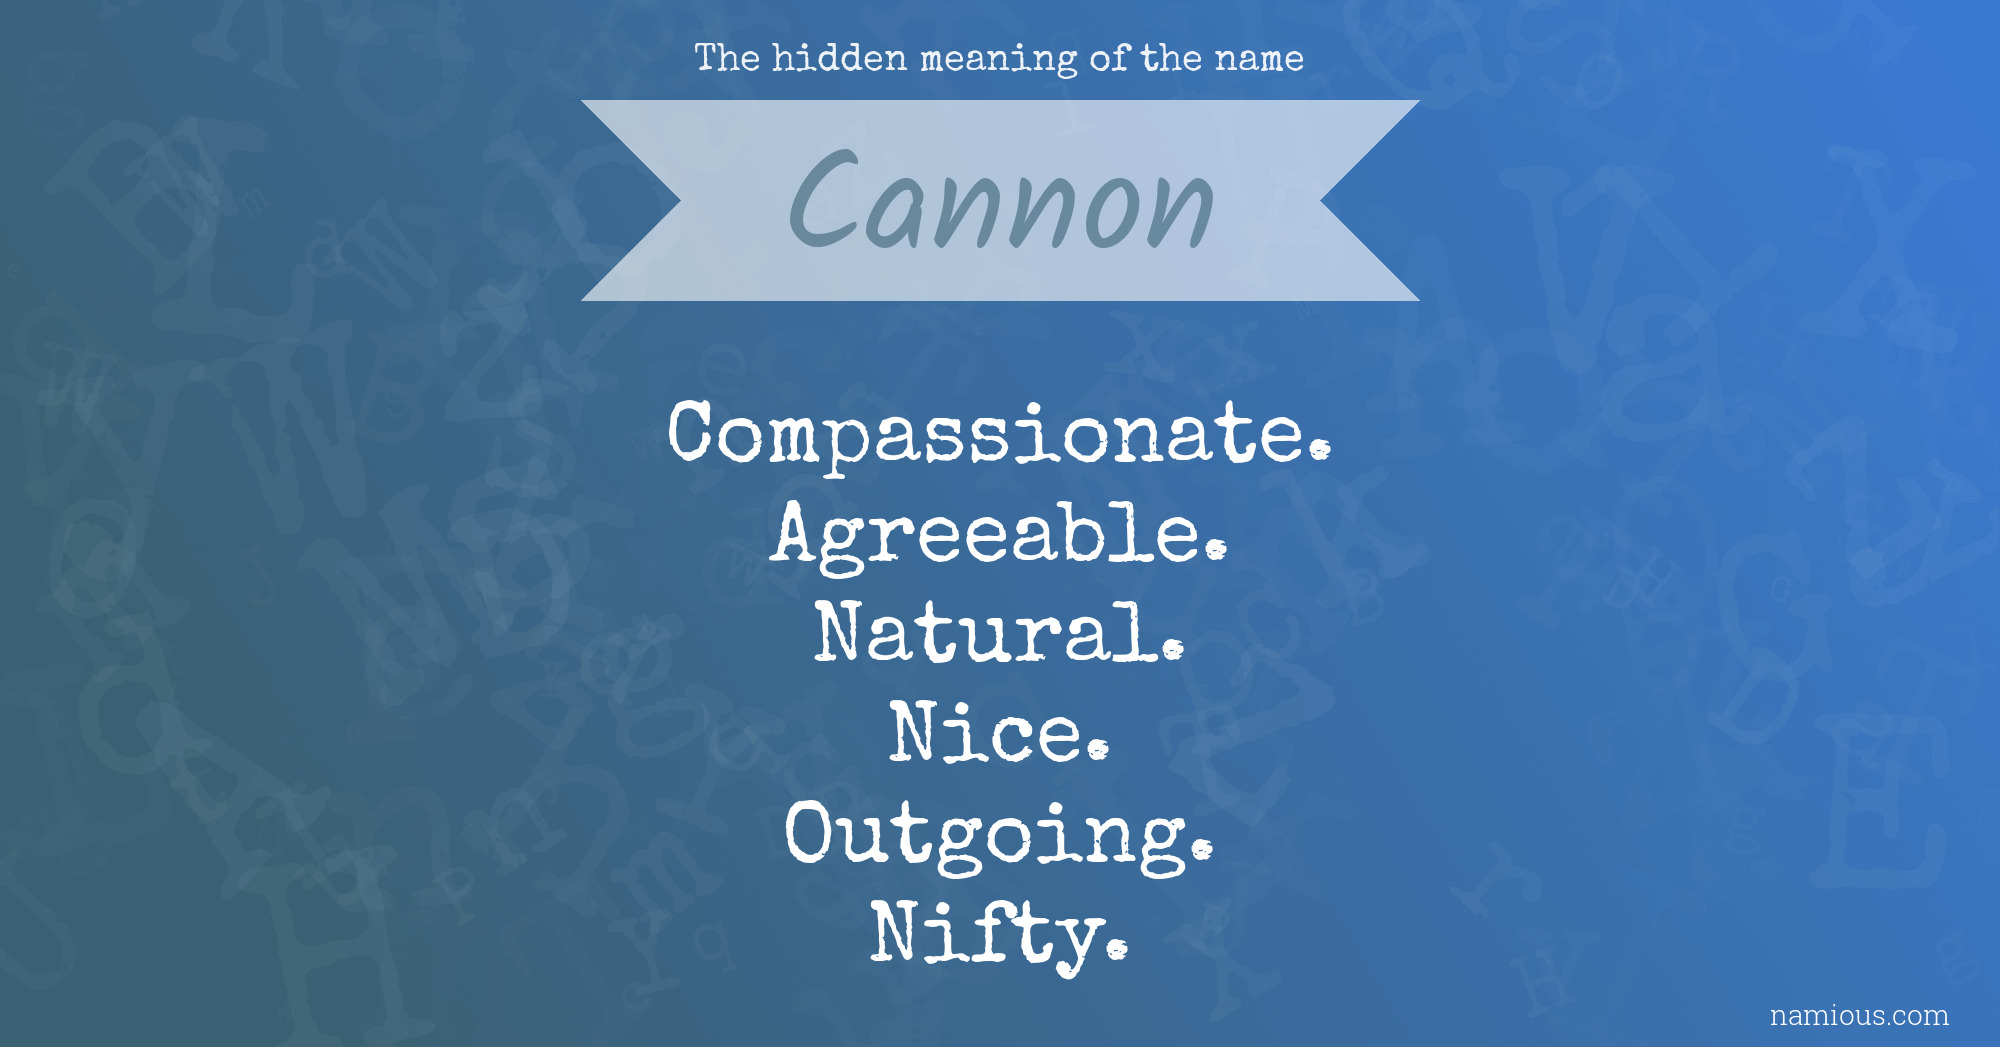 The hidden meaning of the name Cannon